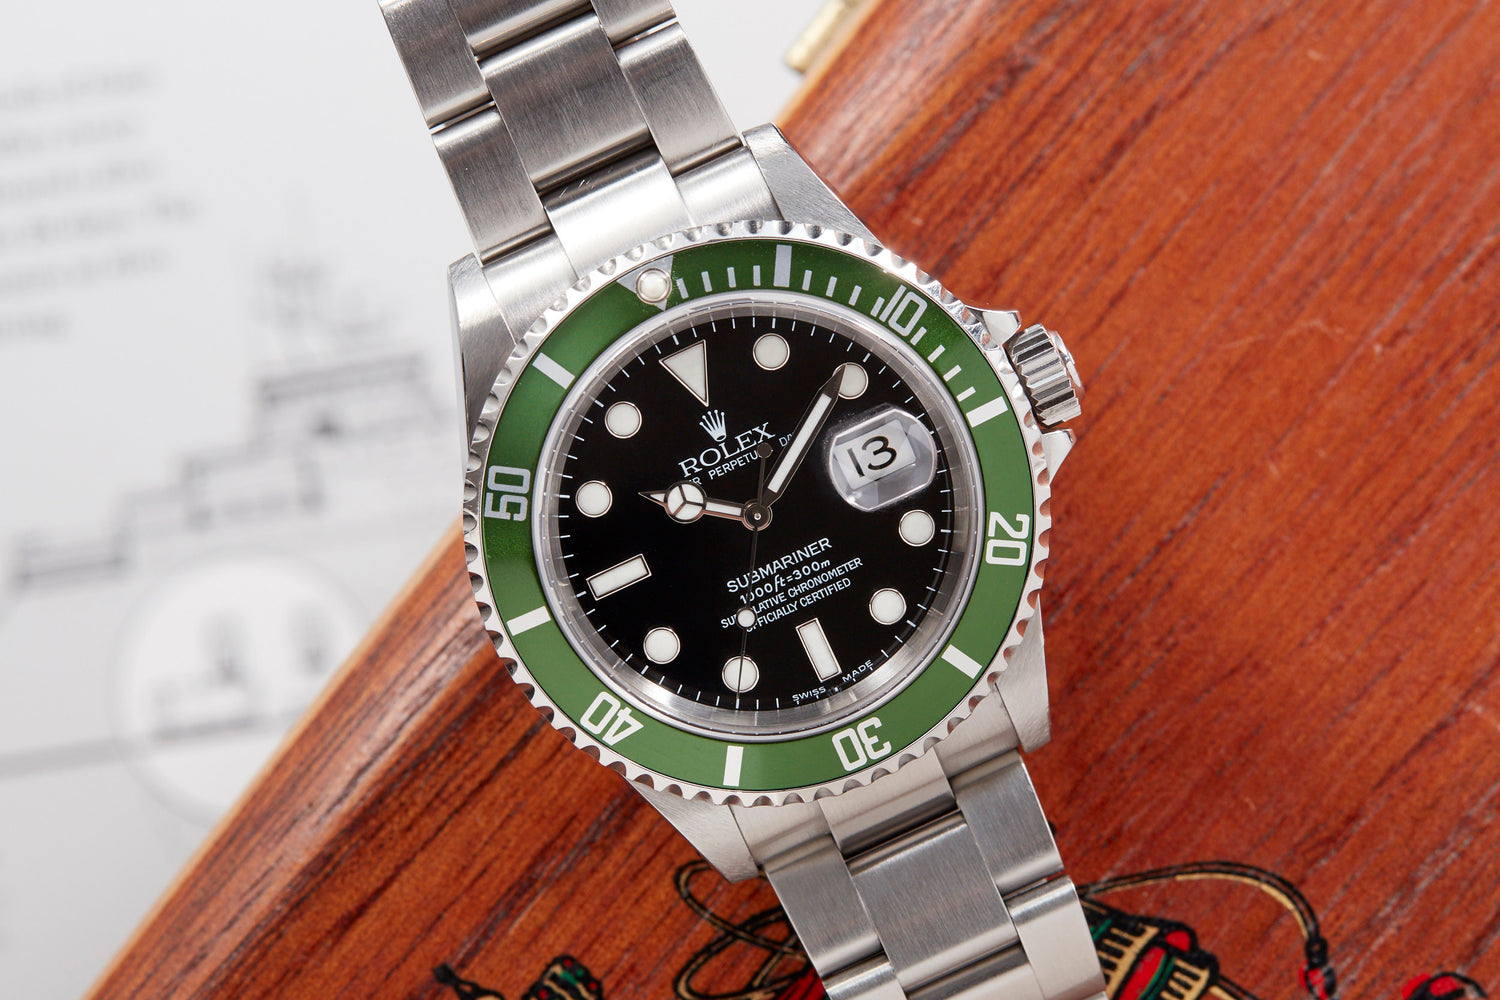 Rolex 16610LV Submariner Date - Pre-owned Luxury Watches